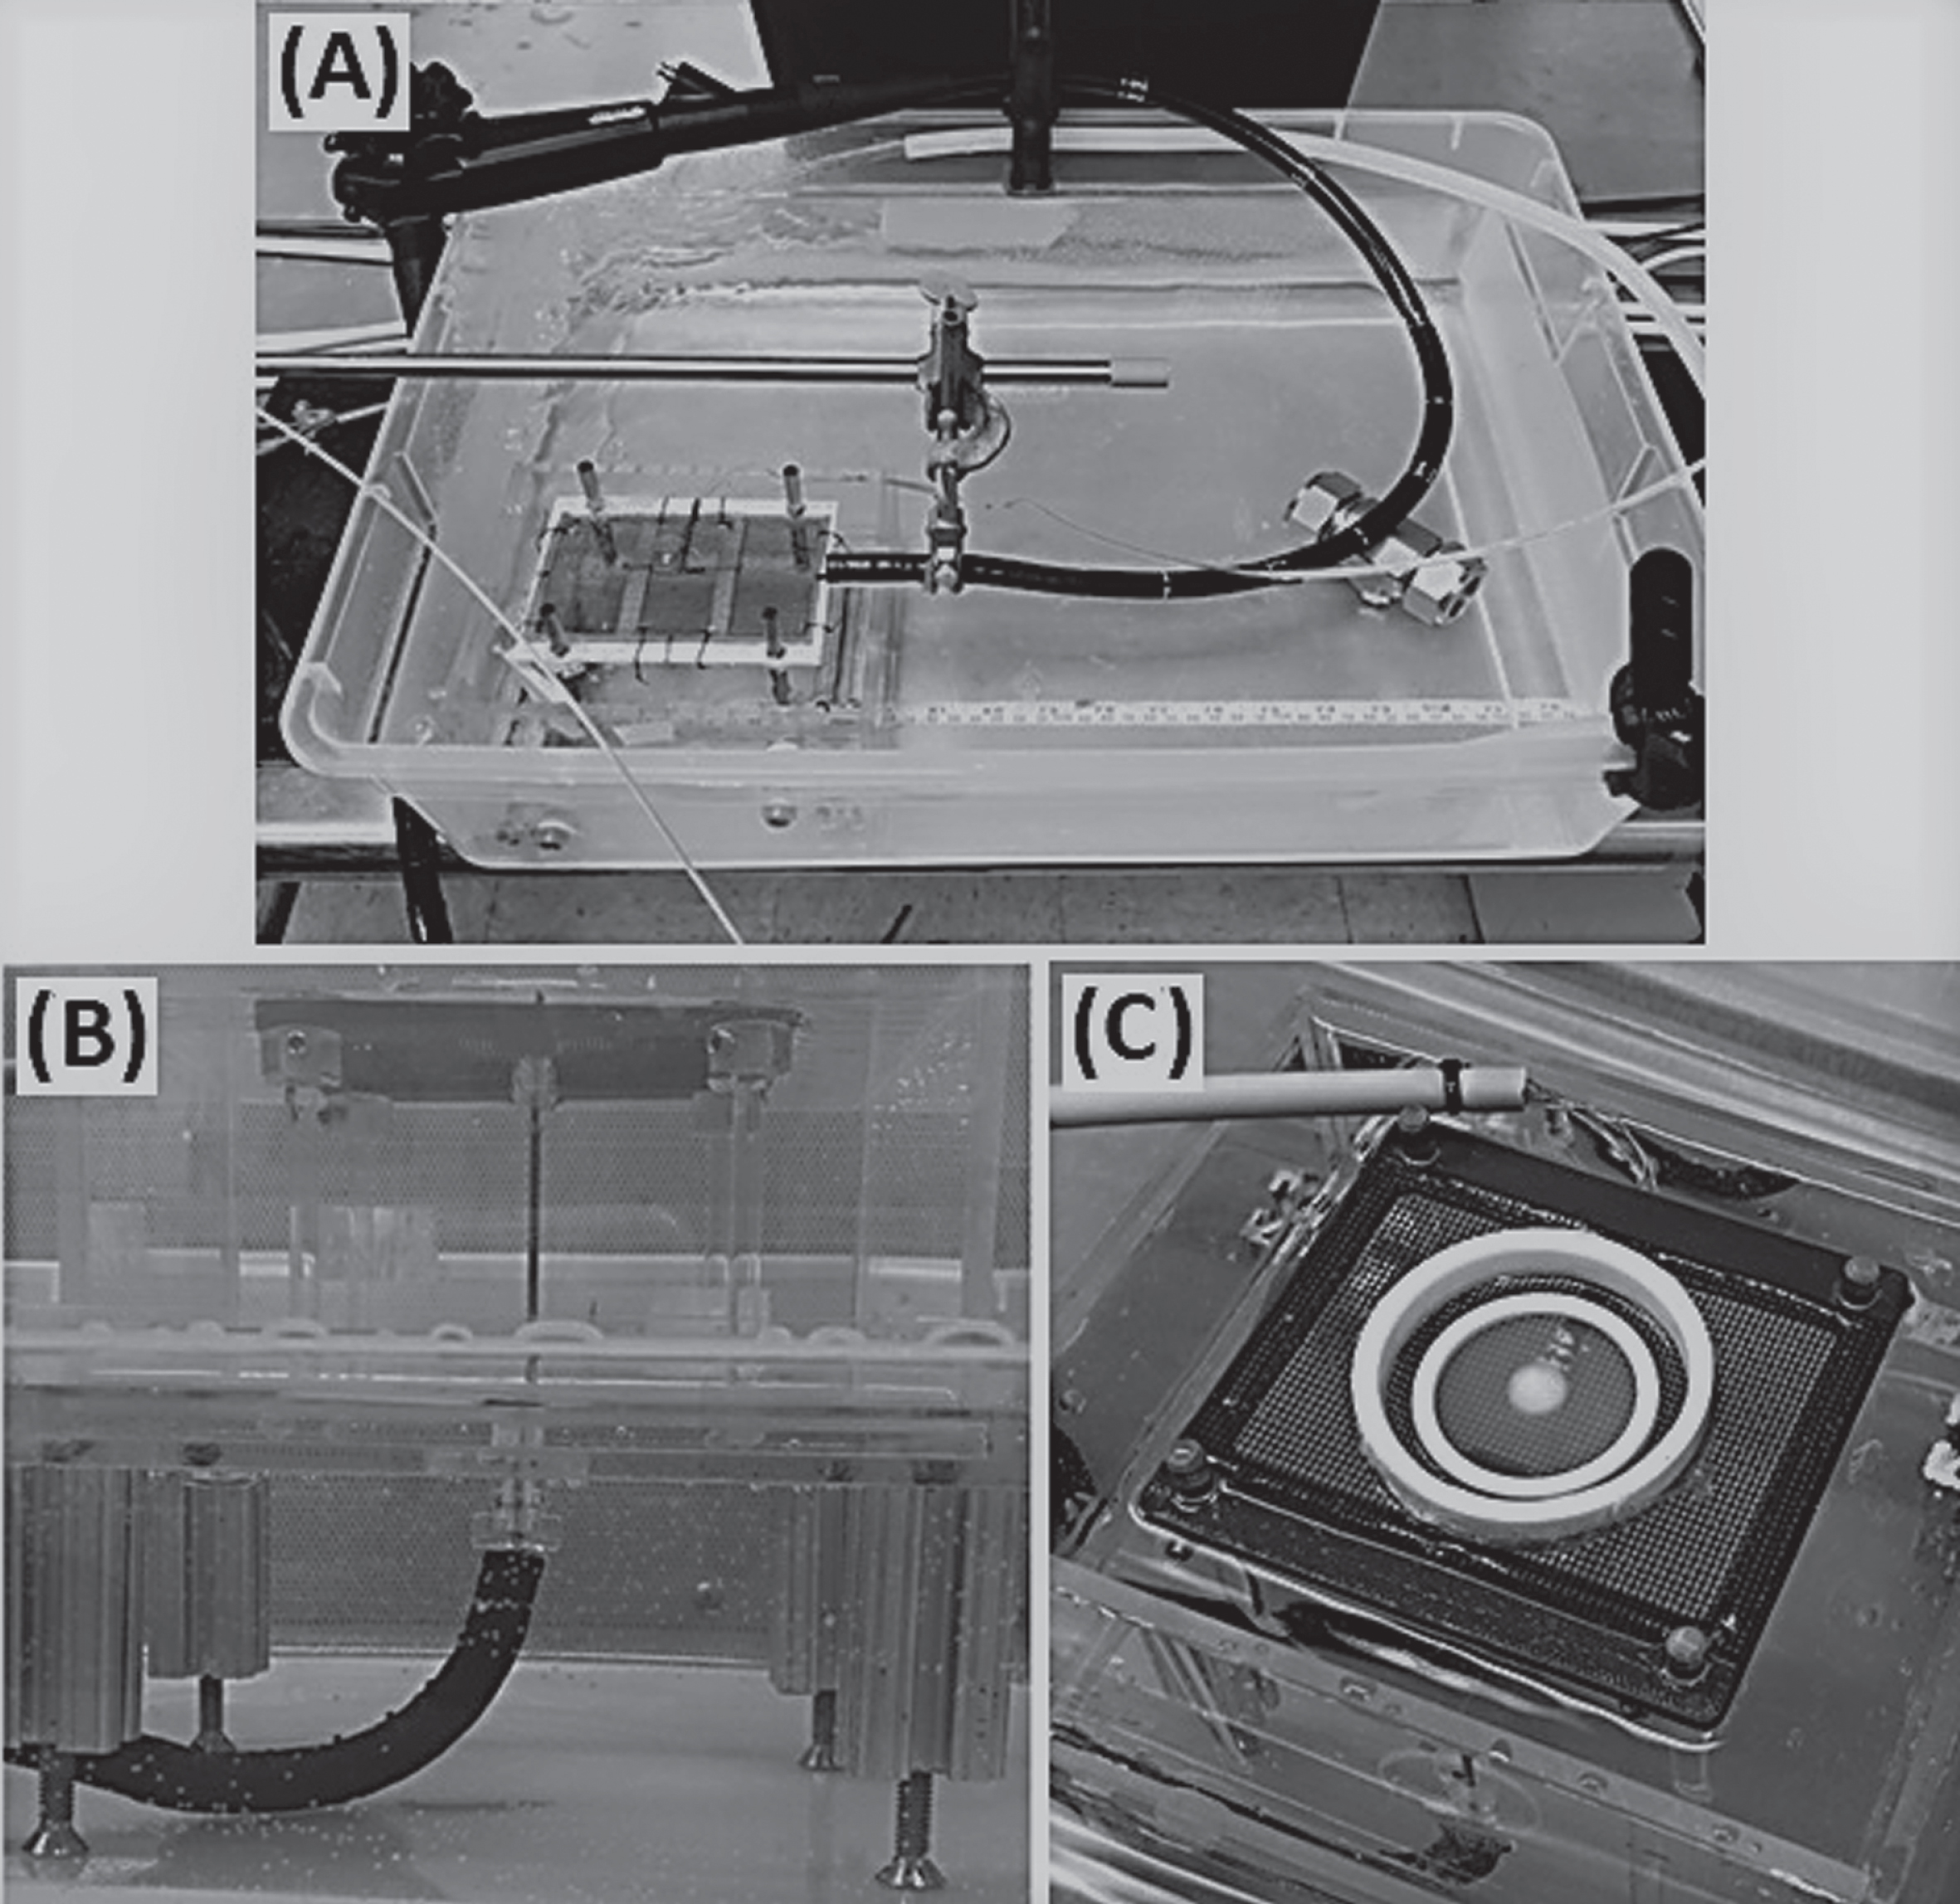 Images of the In Vitro TEM Freeze Experimental Setup. The test set up consisted of an endoscope and an acrylic box containing the TEM platform submerged in a 37°C water bath (A). The cryocatheter was inserted through the scope and the distal end was passed through a sealable gasket on the bottom of the TEM box and placed perpendicular to a mesh platform holding the TEM (B). The SCaBER and UMUC3-TEMs were then placed on the mesh platform, centered over the cryocatheter, and the acrylic box was filled with 37°C Milli-Q grade water to a level even with the TEM ring/probe interface (C).